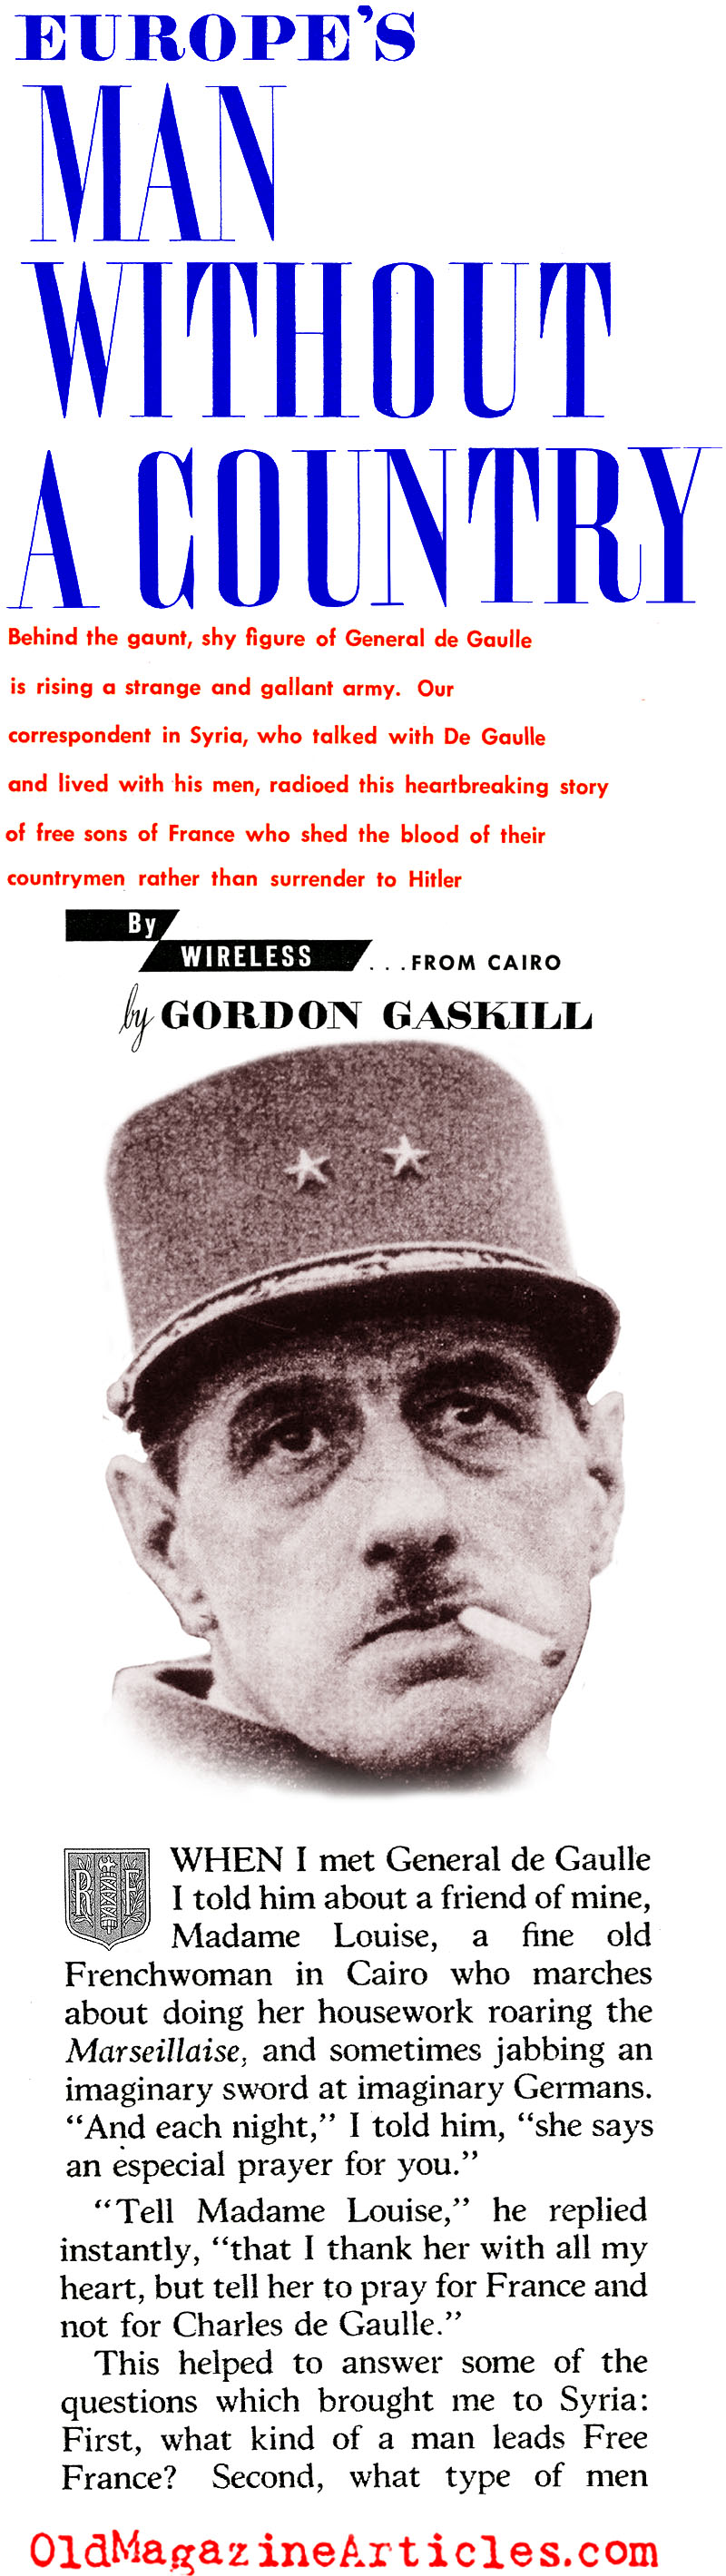 The Leader of Free France (The American Magazine, 1942)